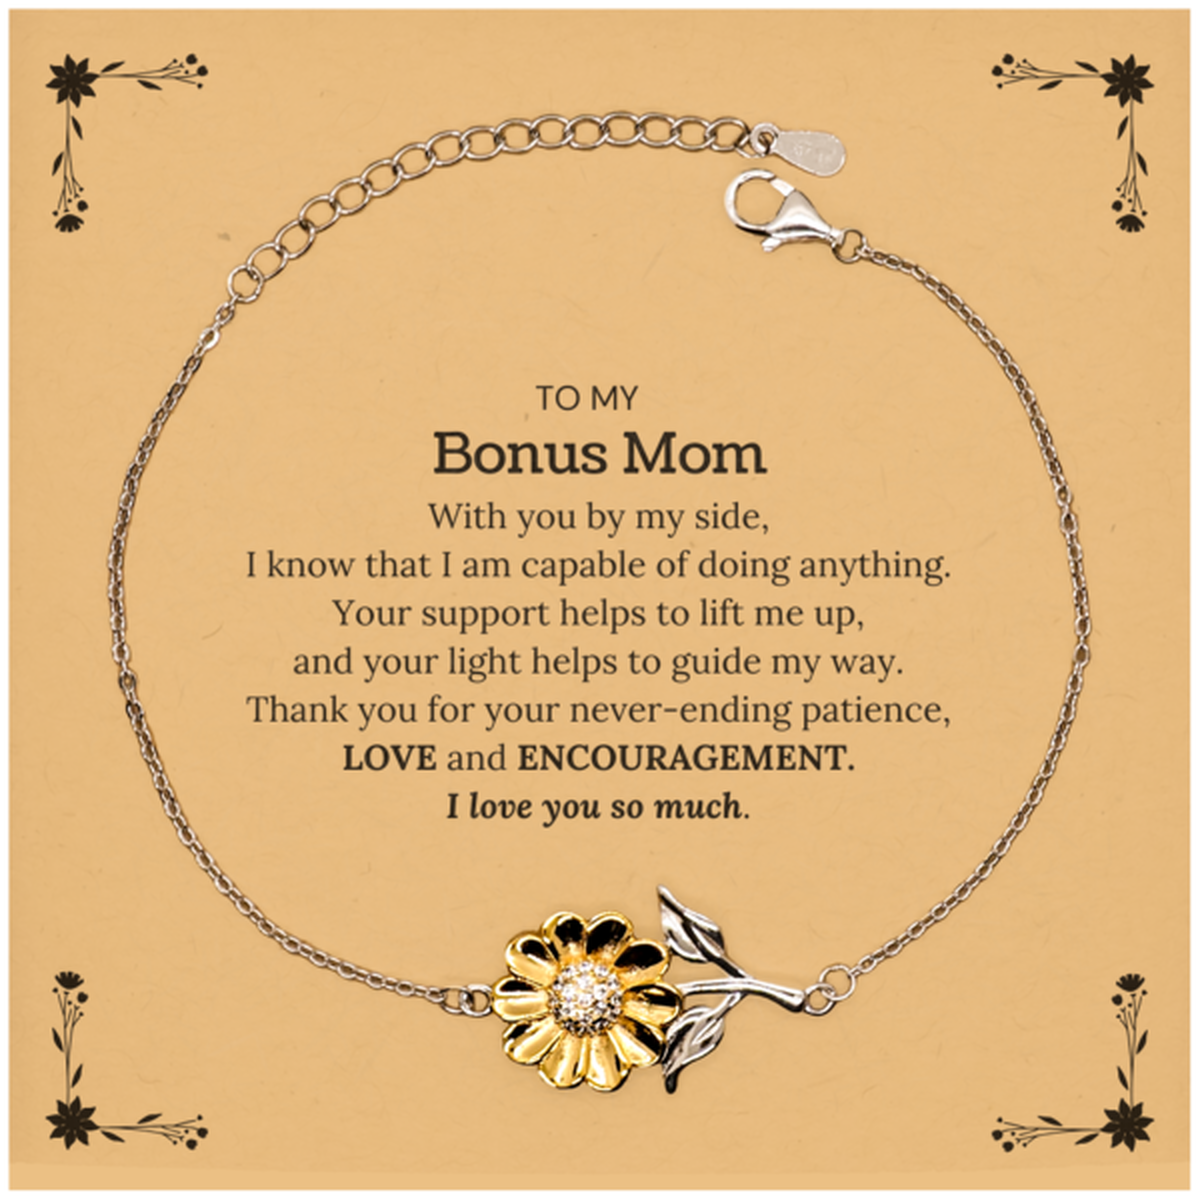 Appreciation Bonus Mom Sunflower Bracelet Gifts, To My Bonus Mom Birthday Christmas Wedding Keepsake Gifts for Bonus Mom With you by my side, I know that I am capable of doing anything. I love you so much